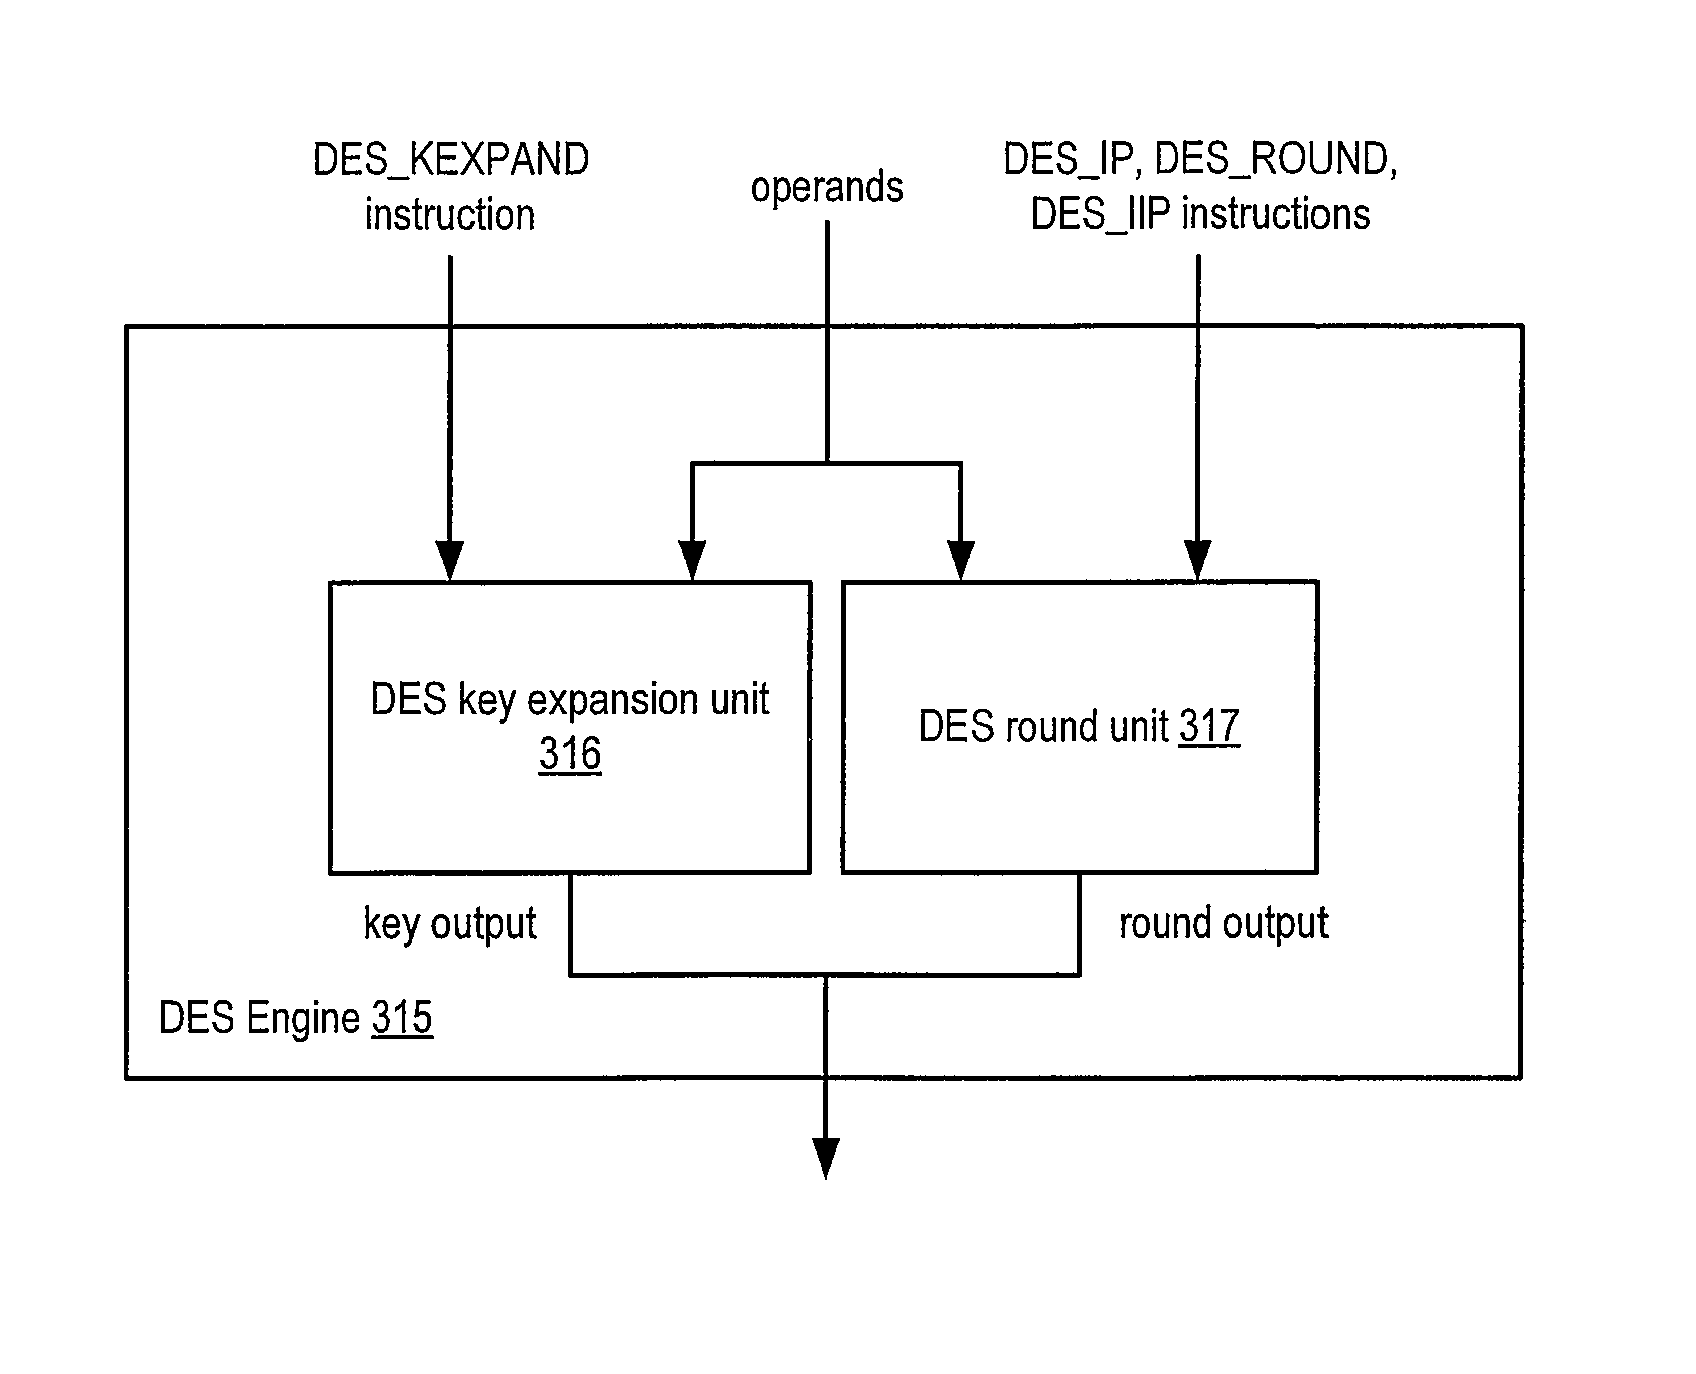 Apparatus and method for implementing instruction support for the data encryption standard (DES) algorithm